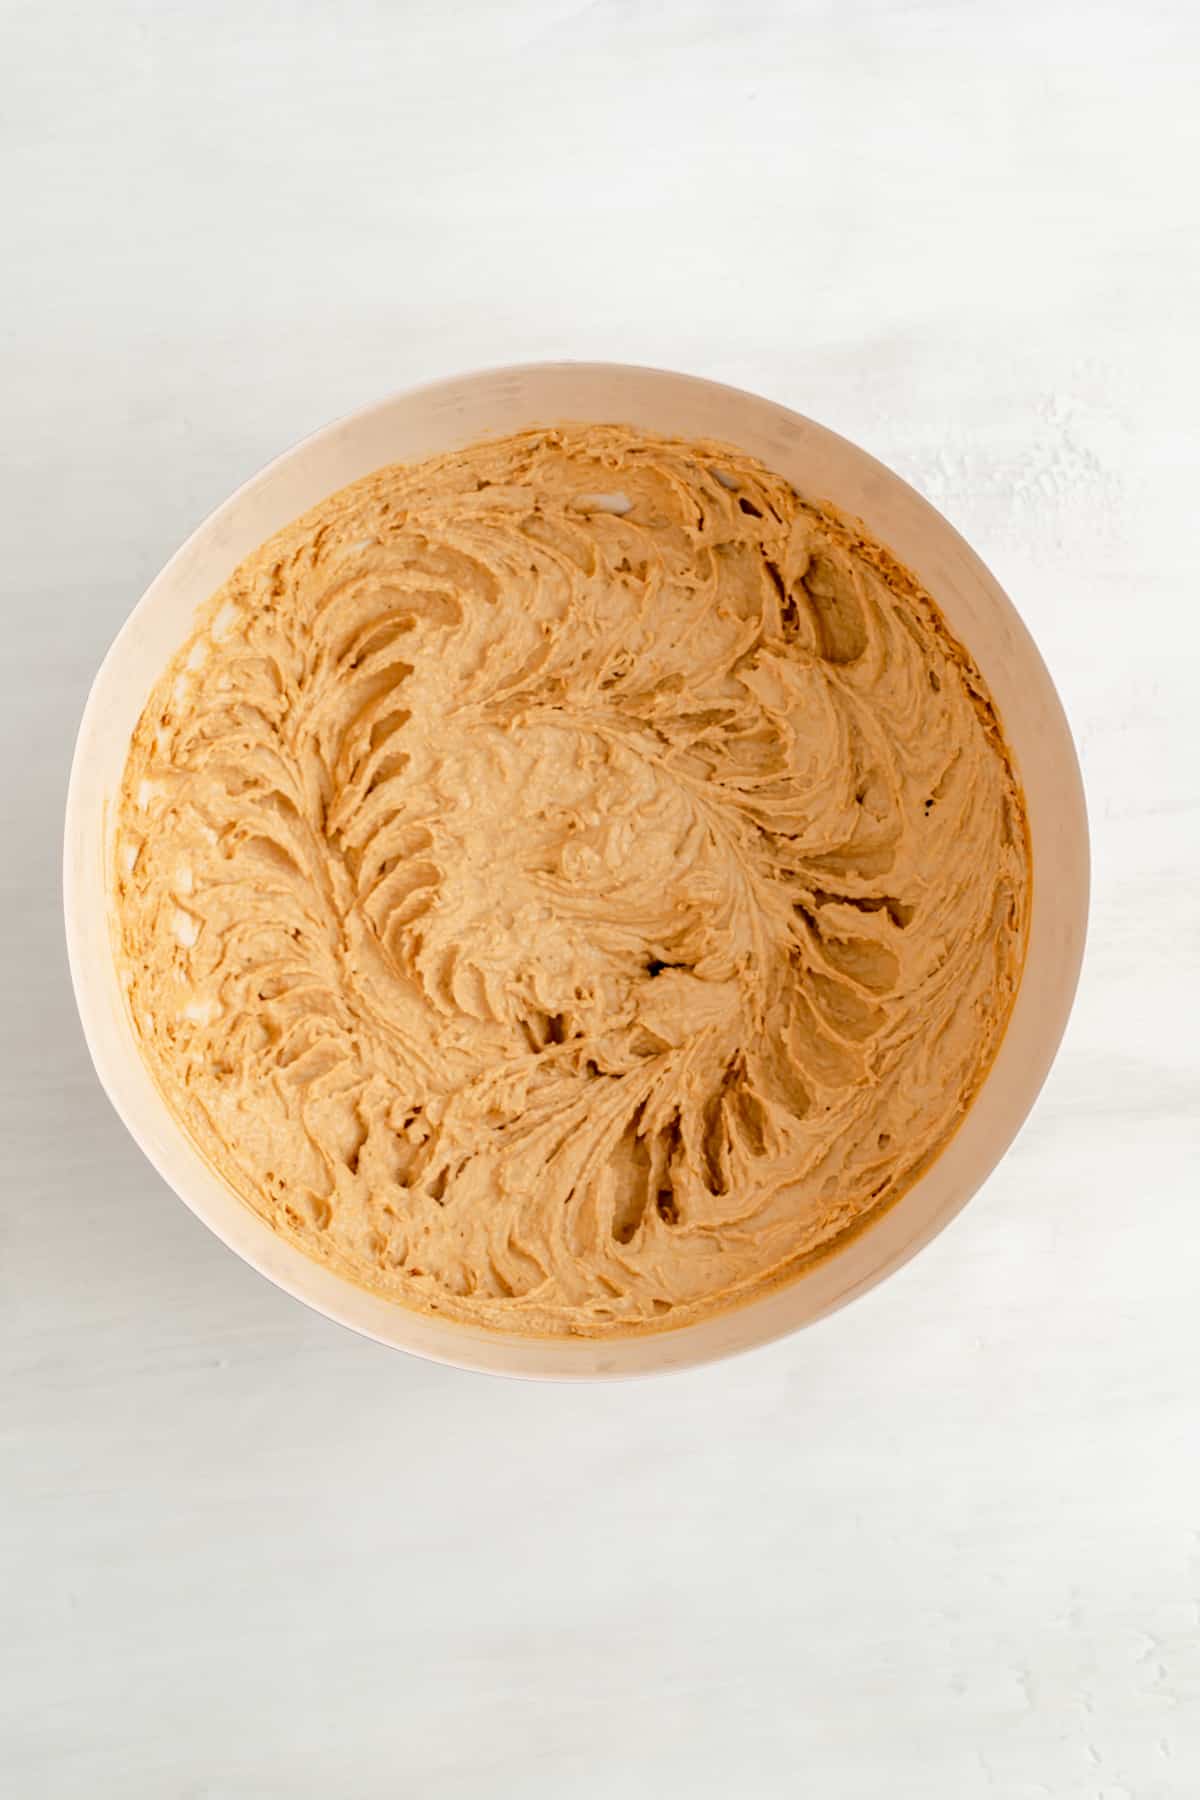 creamed butters, sugars, and egg in a tan mixing bowl on white wood background.